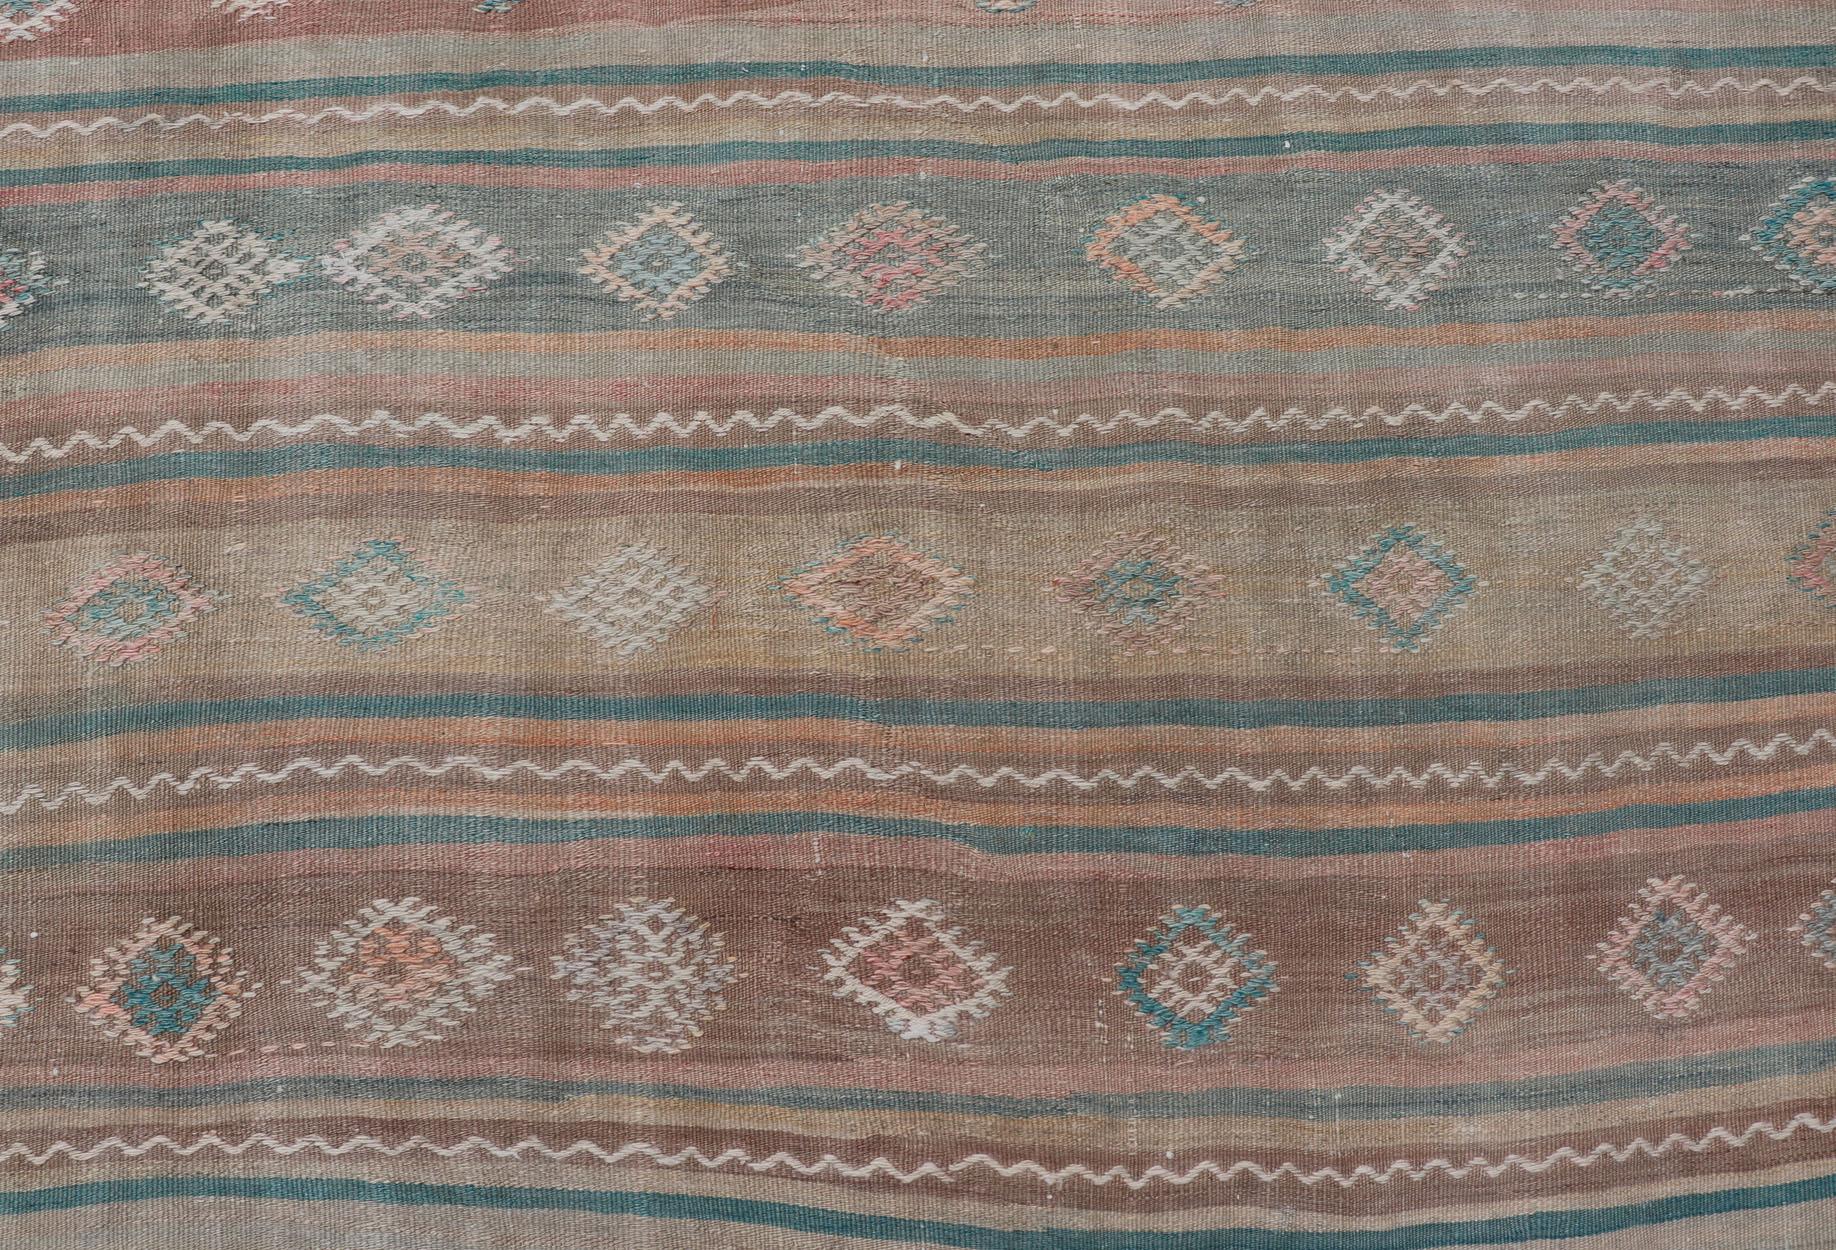 Vintage Long Colorful Kilim Gallery Rug with Stripe Design in Soft Colors For Sale 4